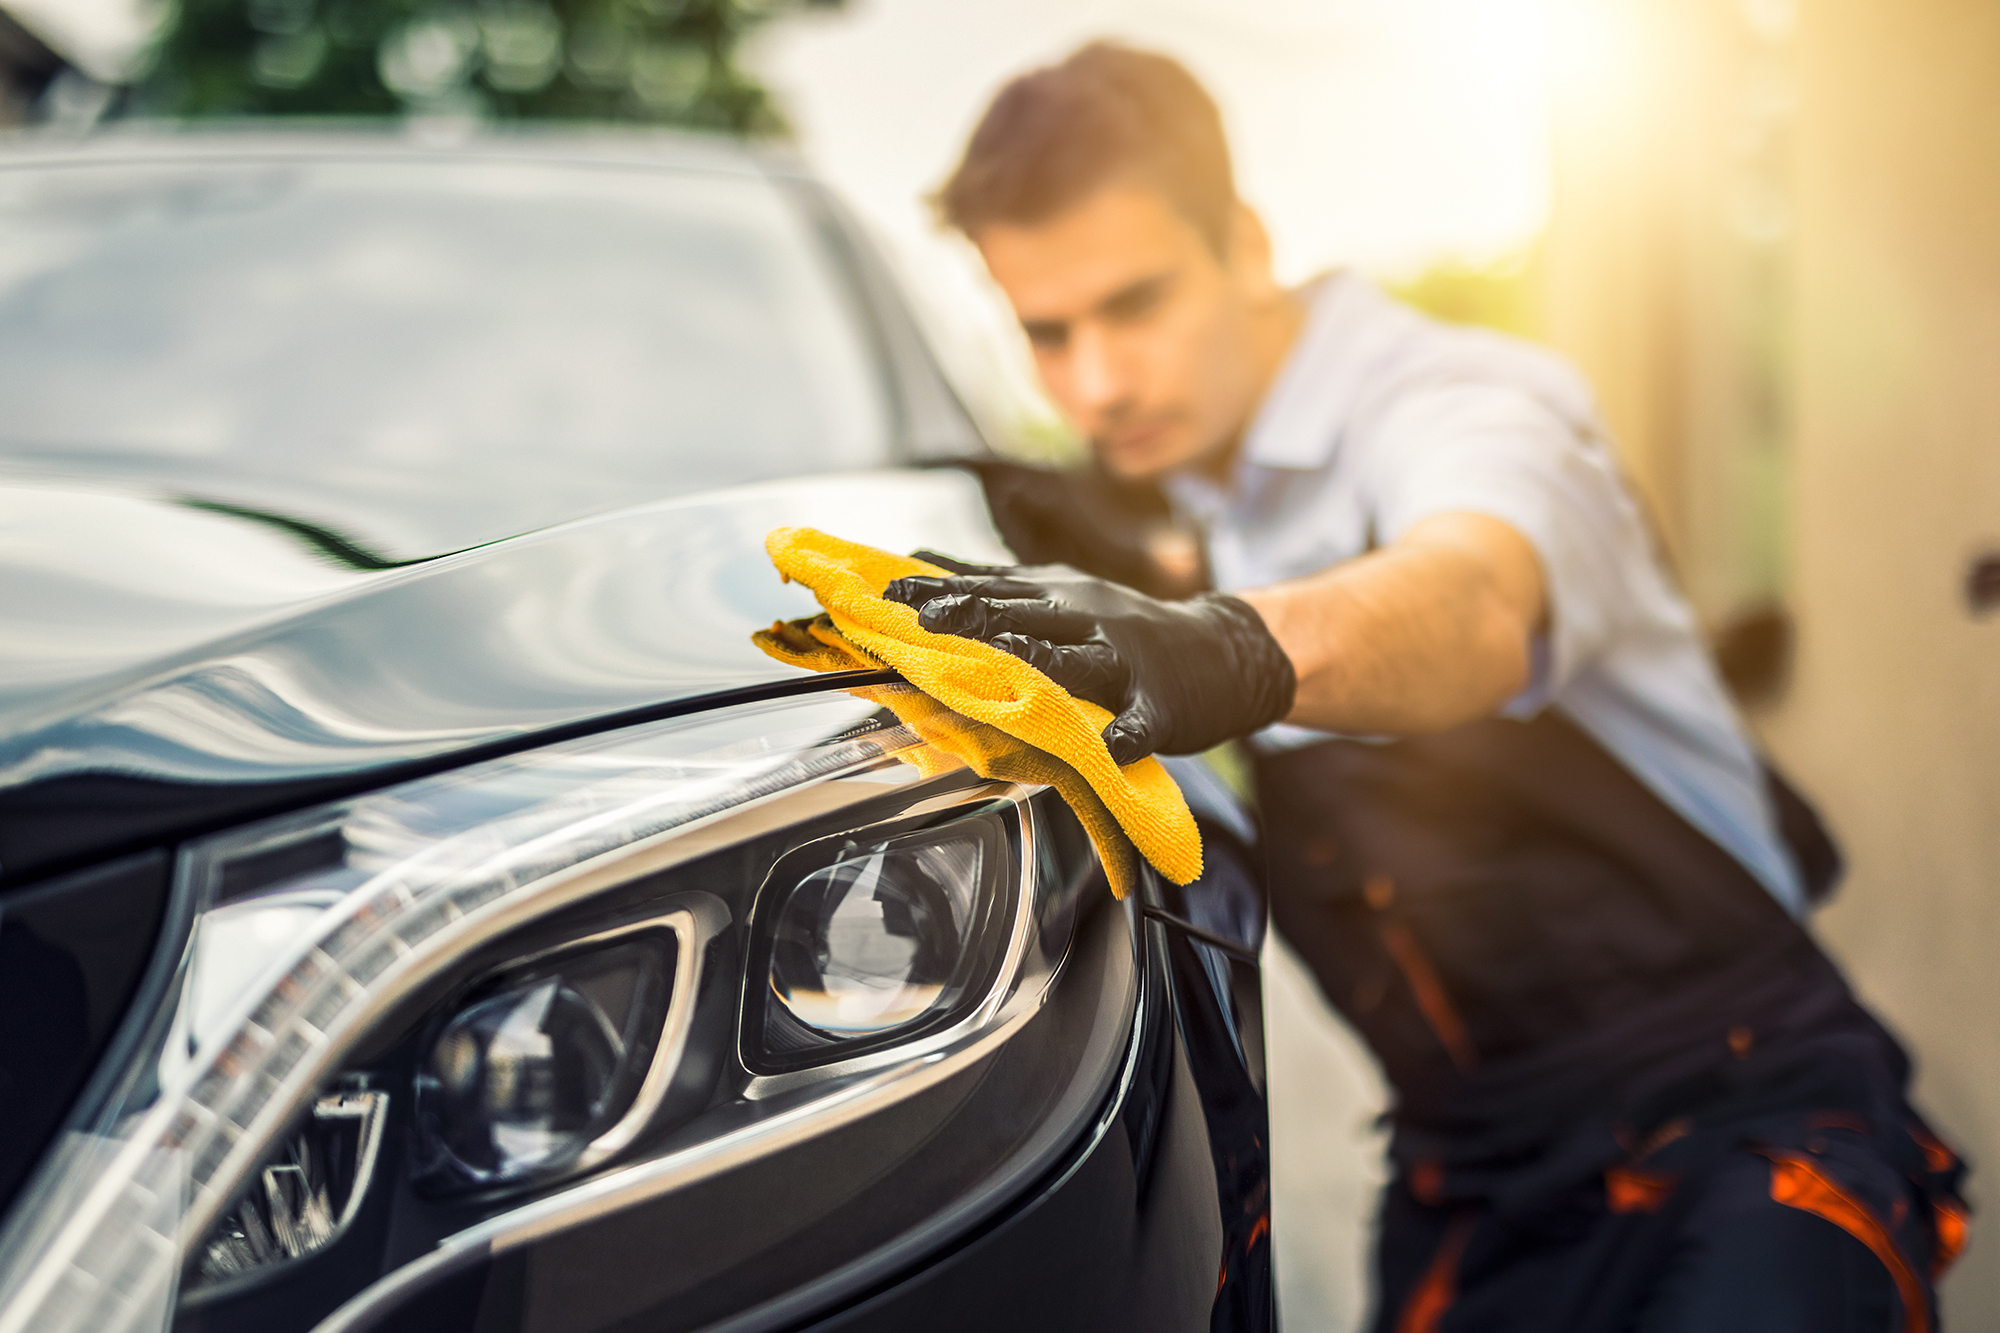 Man cleaning car. (Image: Shutterstock)